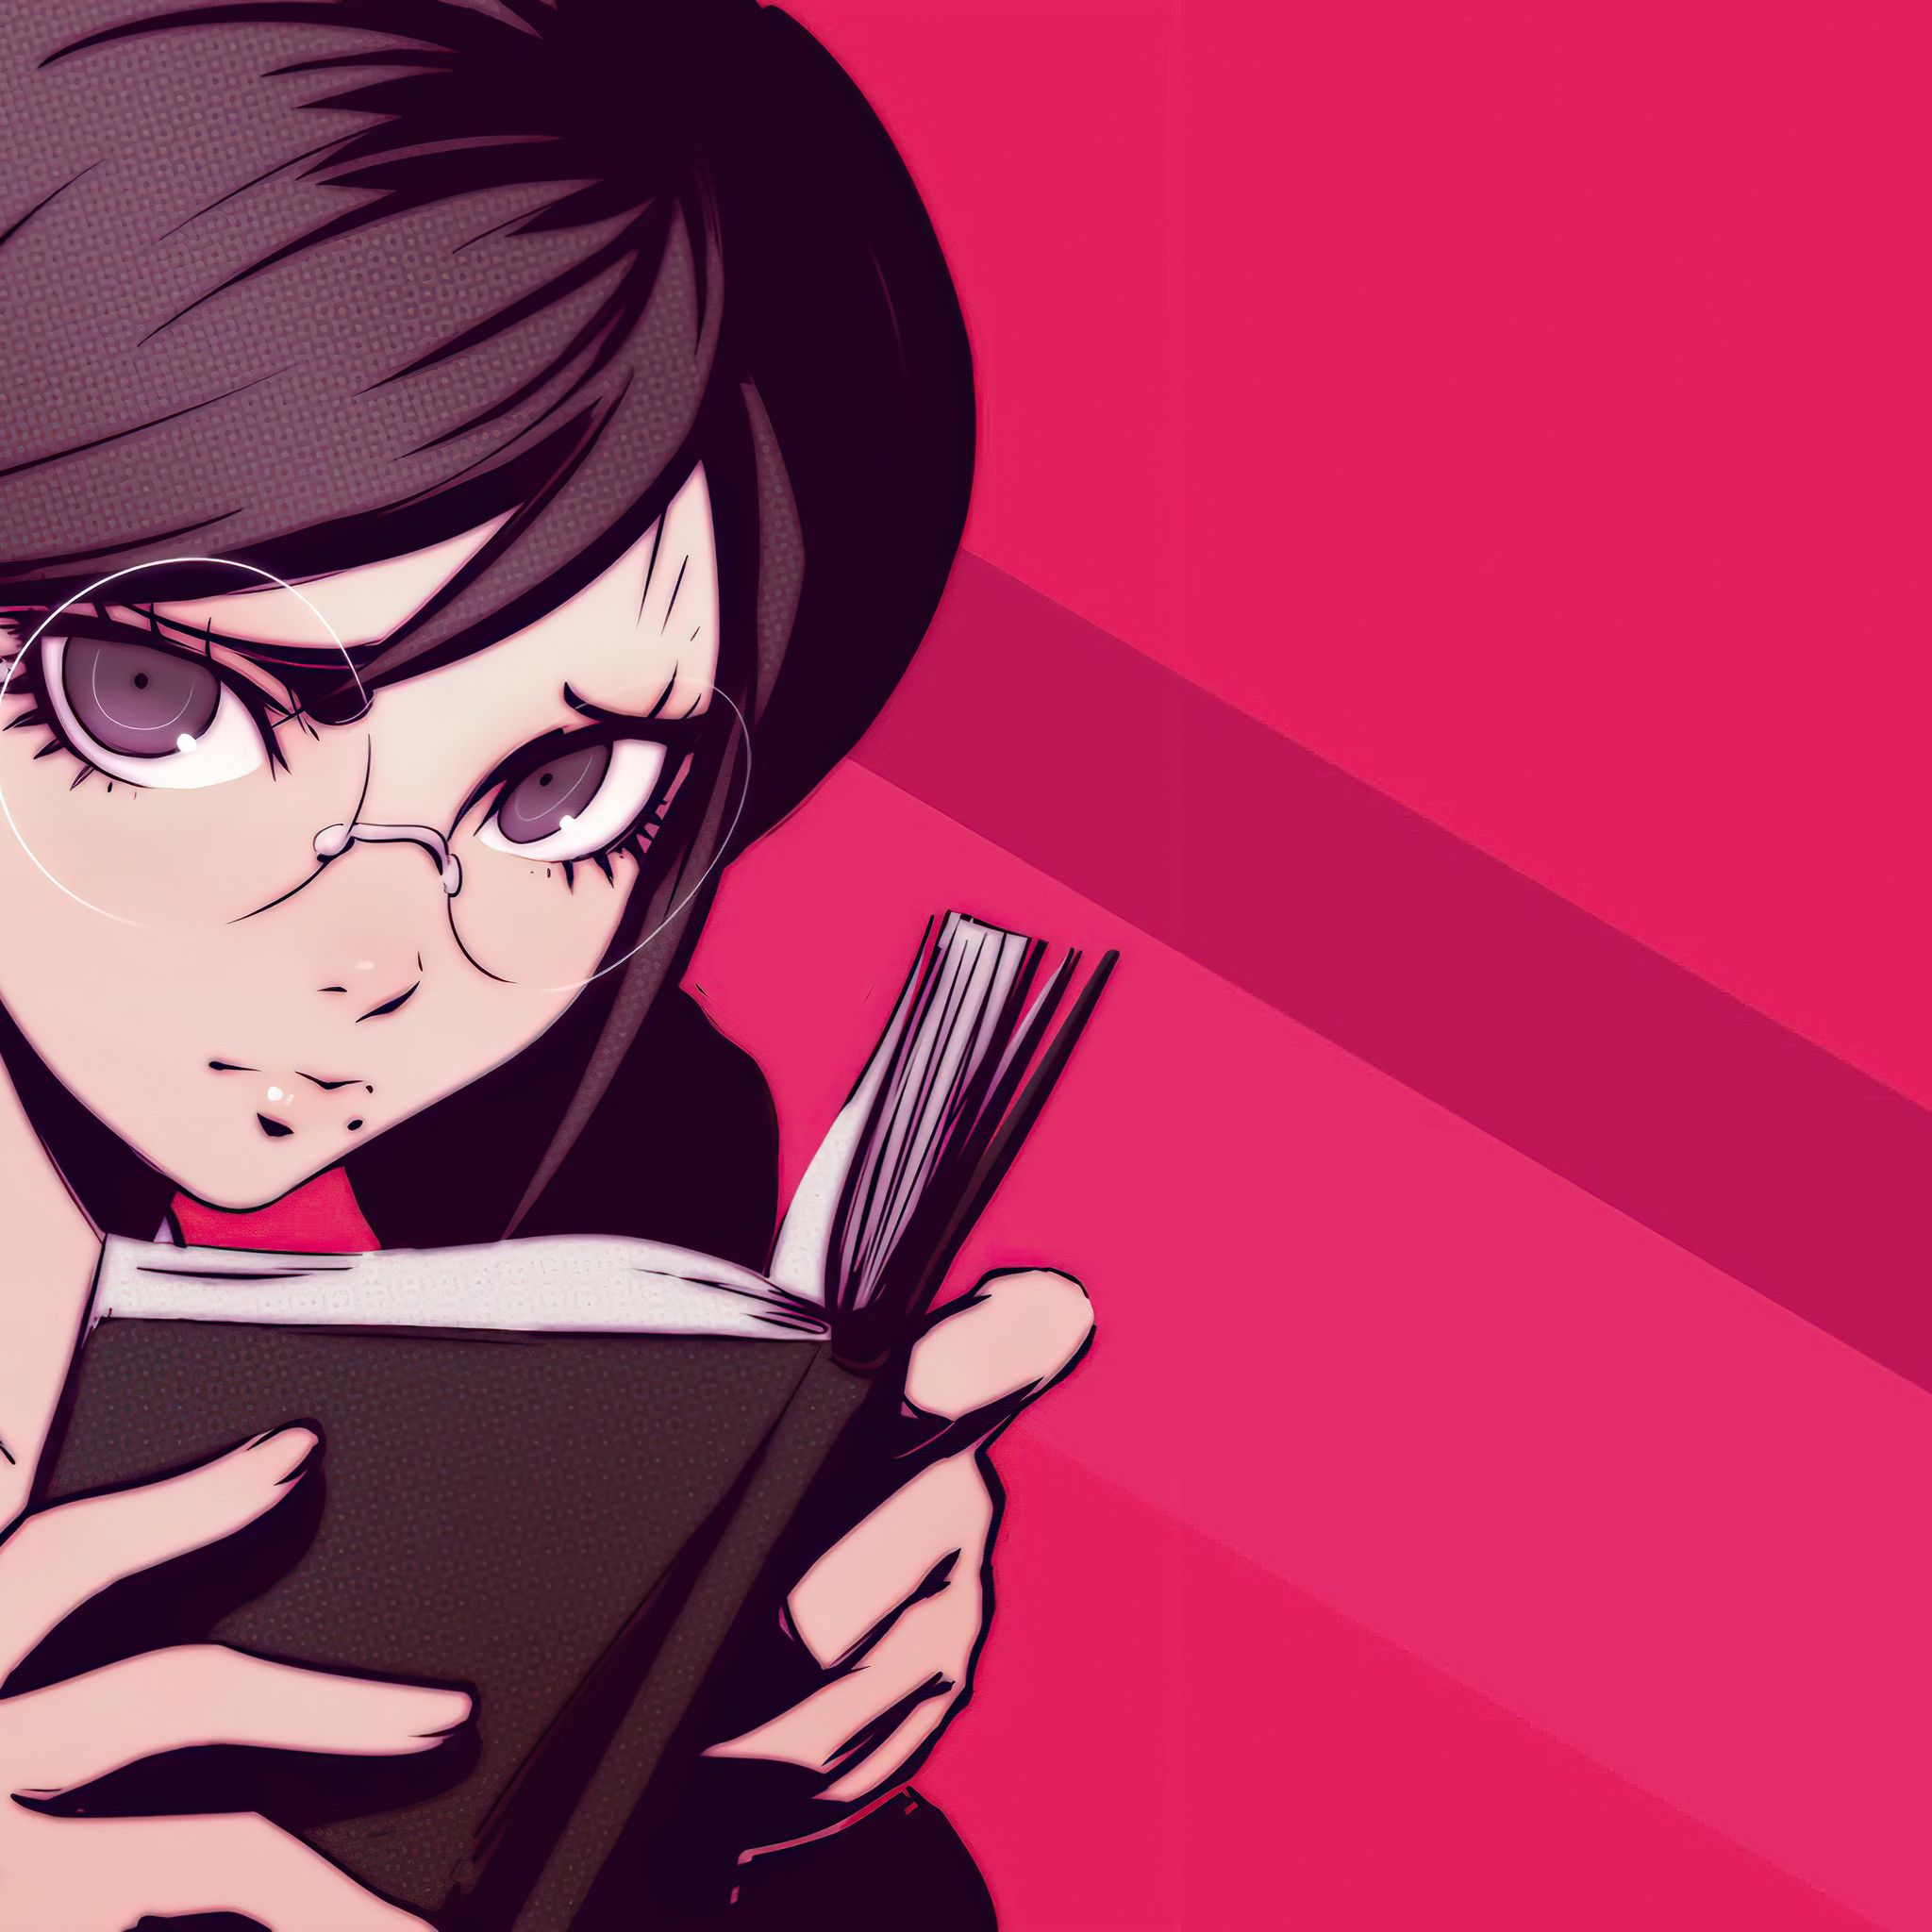 A girl with glasses reading a book - Danganronpa